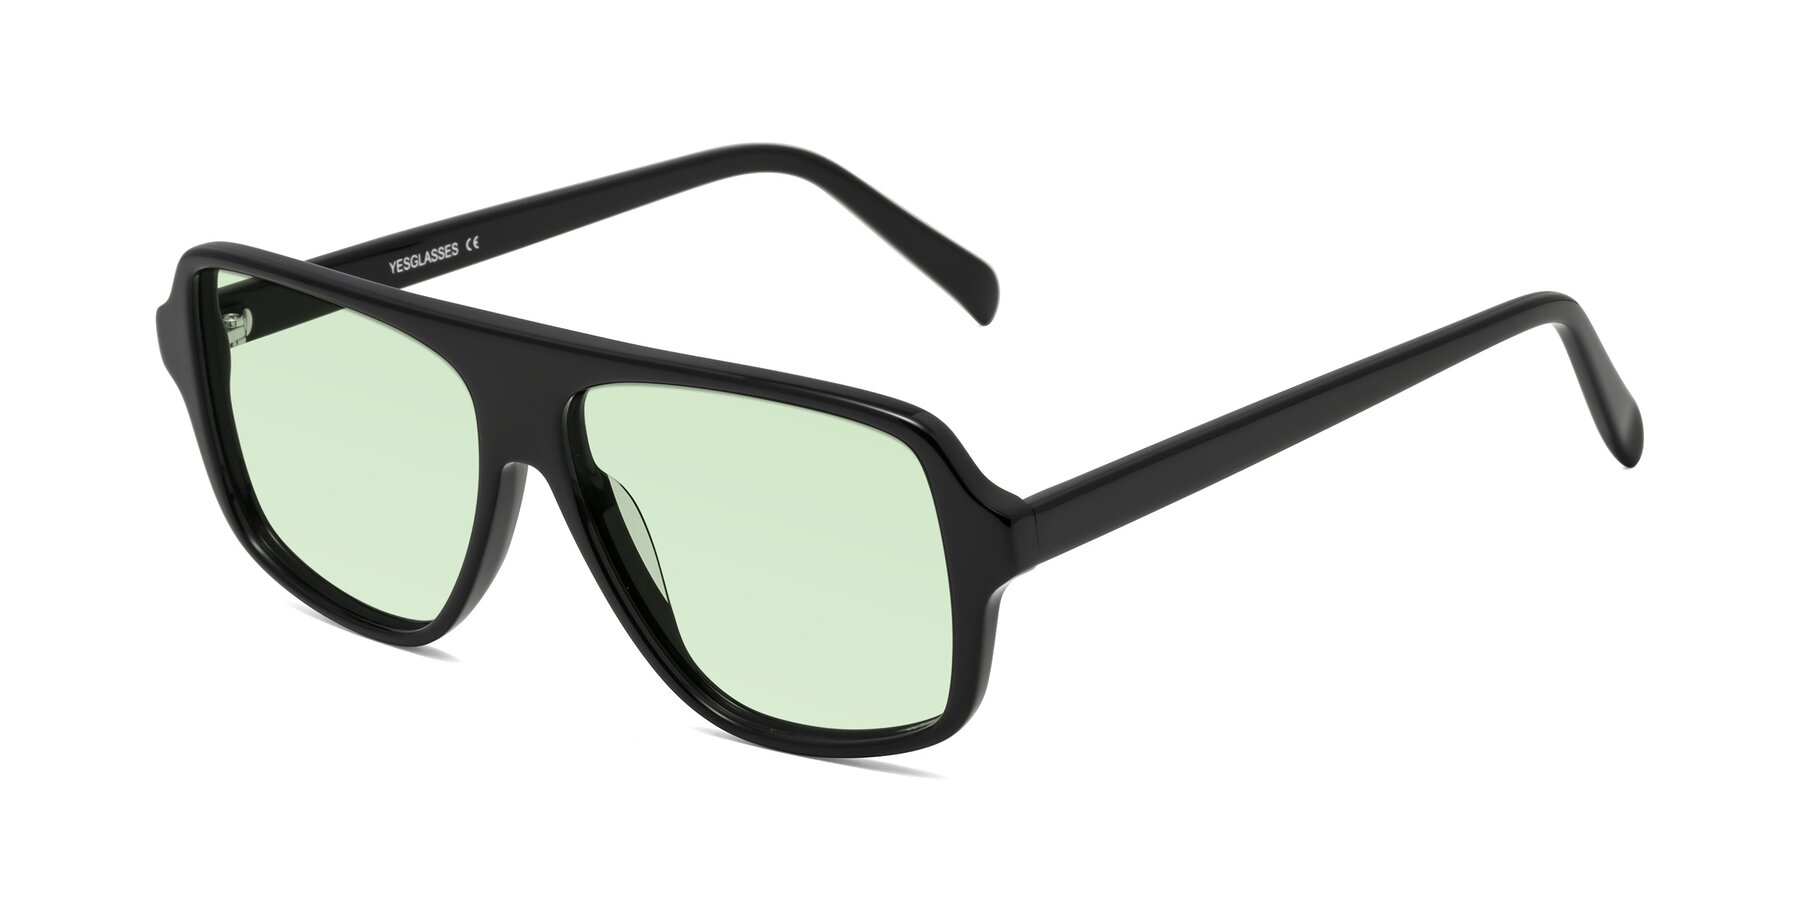 Angle of O'Leary in Black with Light Green Tinted Lenses